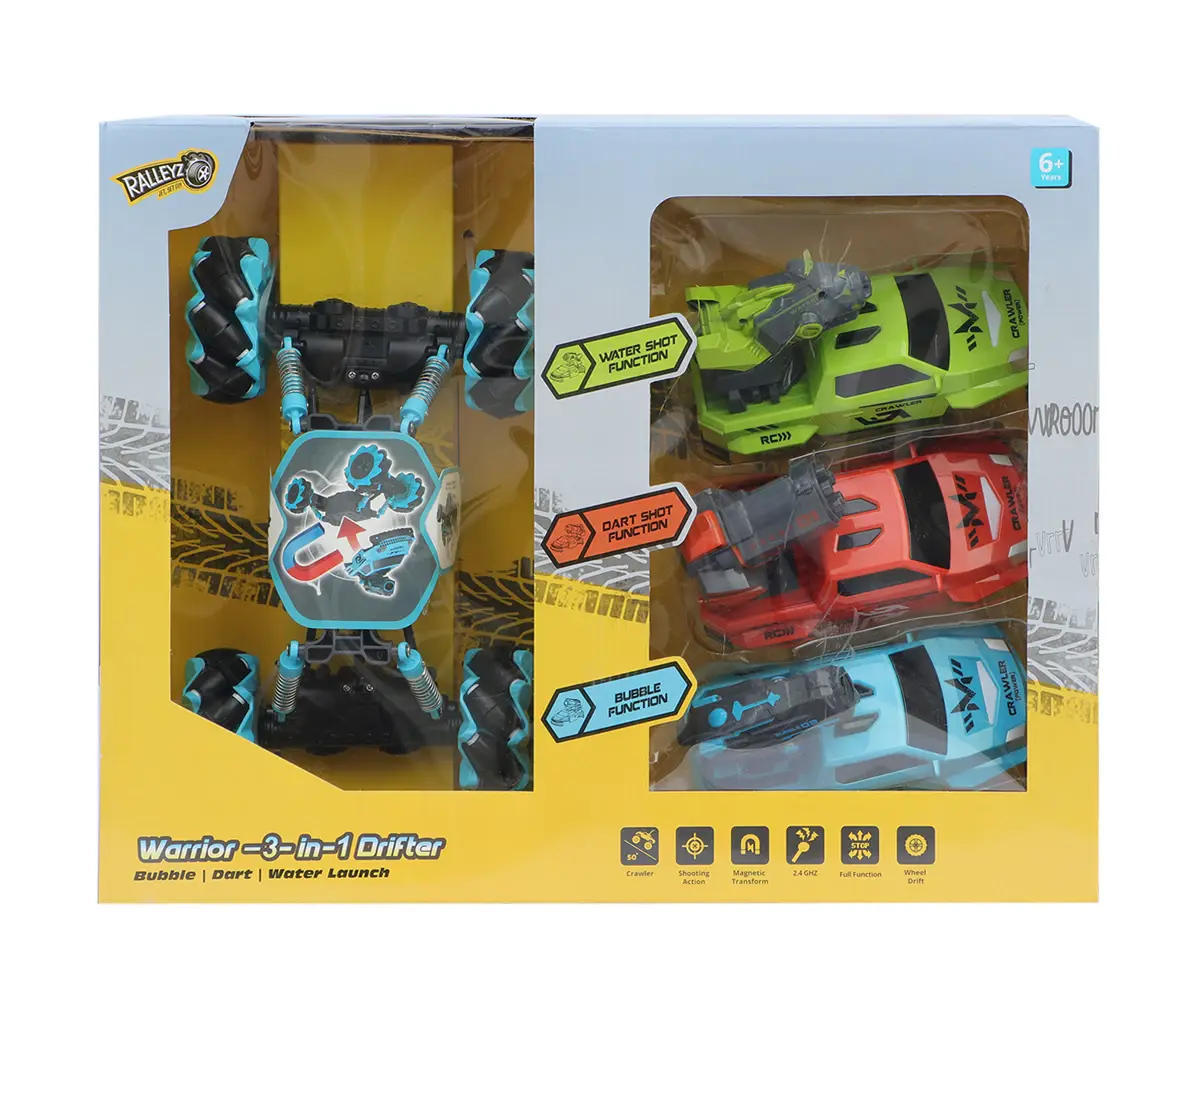 Ralleyz 1:10 Scale 3 In 1 Crawling Off Roader Remote Control Car with 2.4GHZ for Kids 6Y+, Multicolour